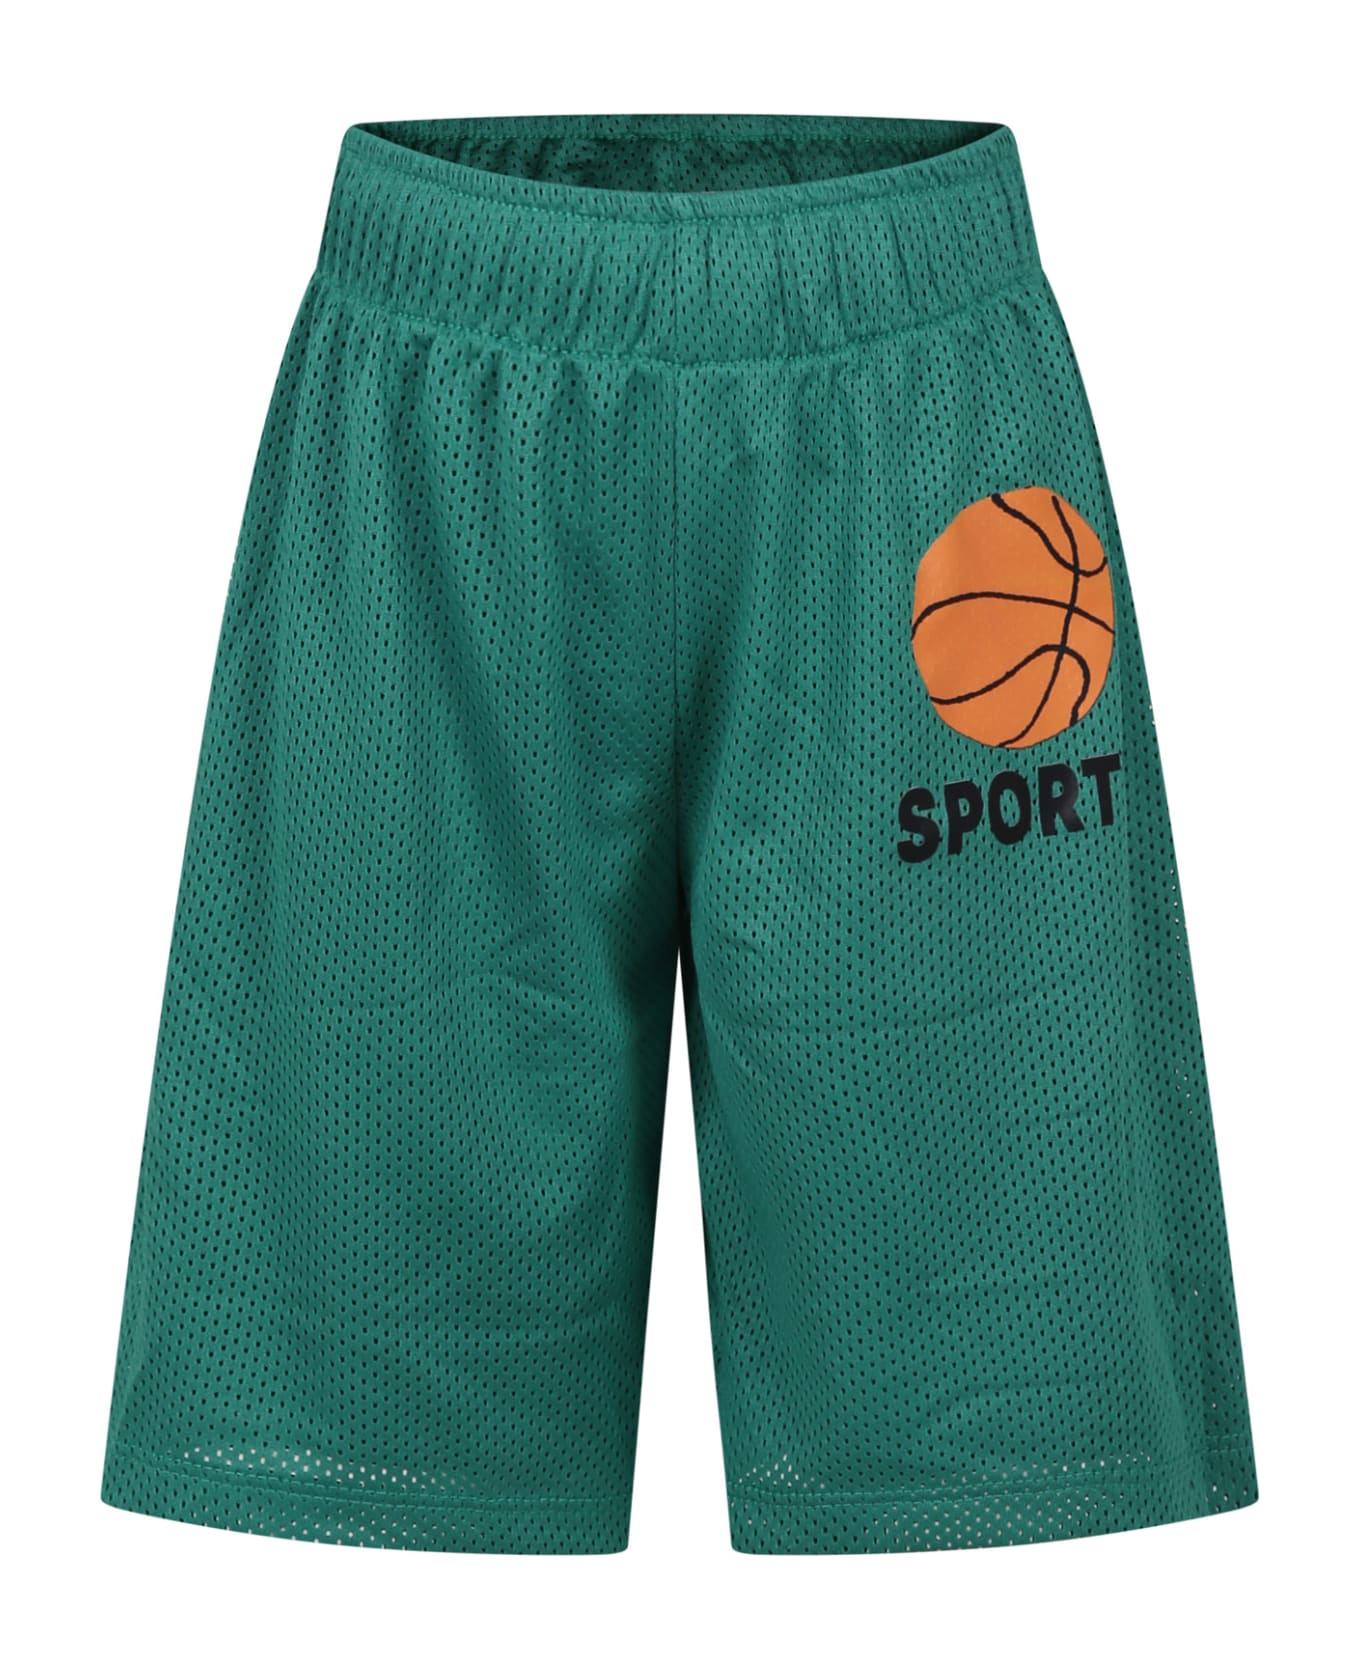 Mini Rodini Green Sports Shorts For Kids With Basketball - Green ボトムス